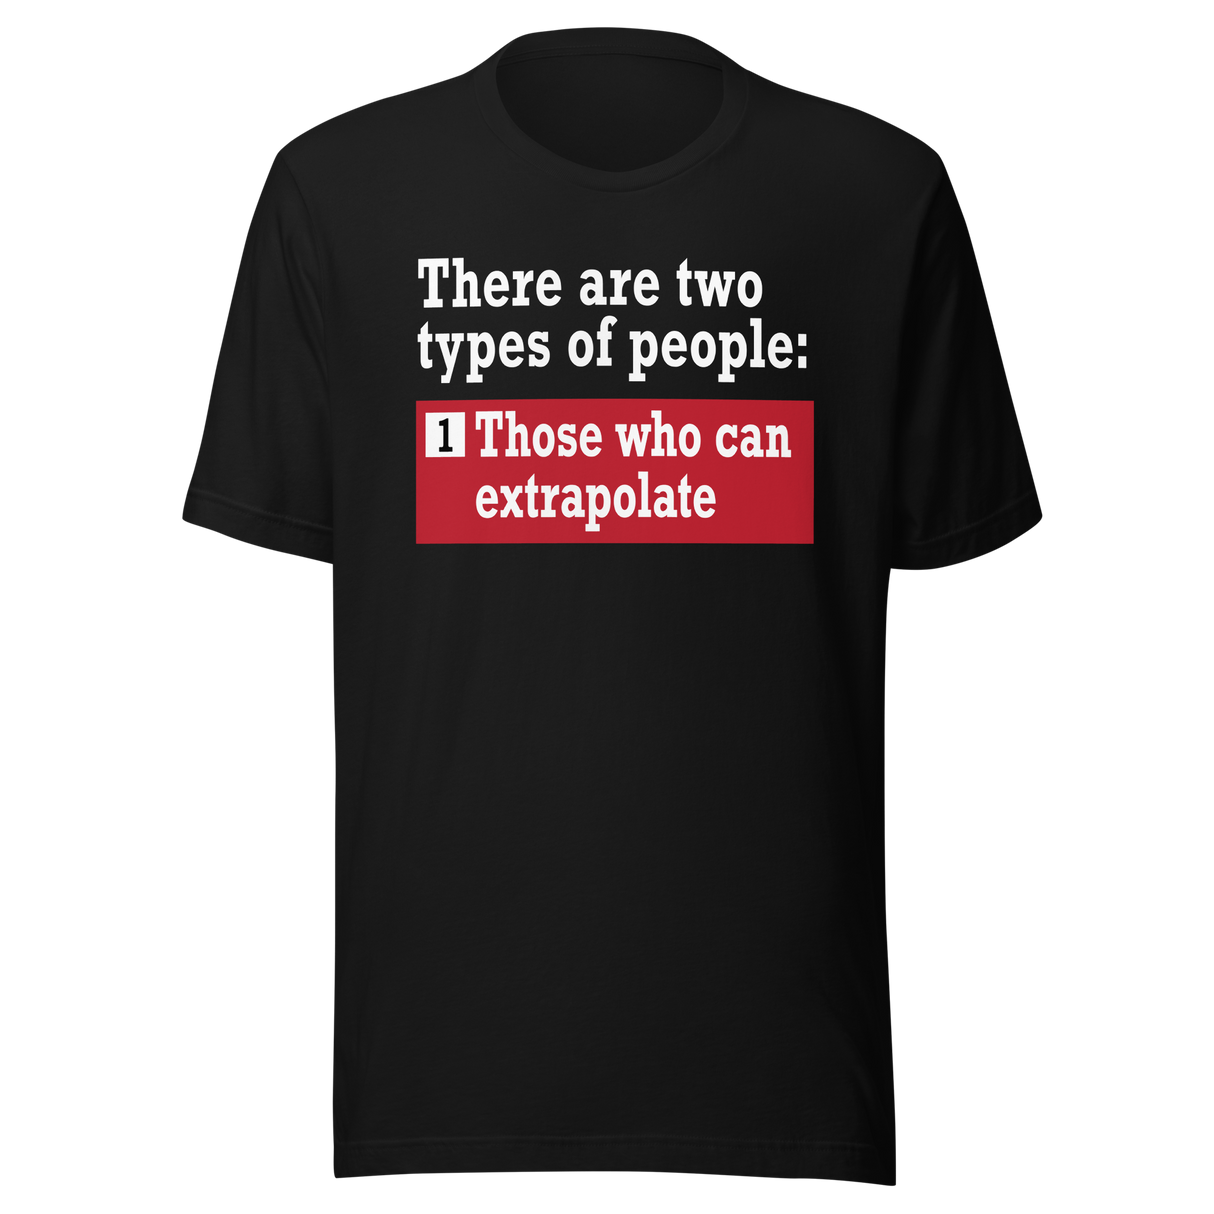 there-are-two-types-of-people-those-who-can-extrapolate-and-humor-tee-playful-t-shirt-joke-tee-t-shirt-tee#color_black